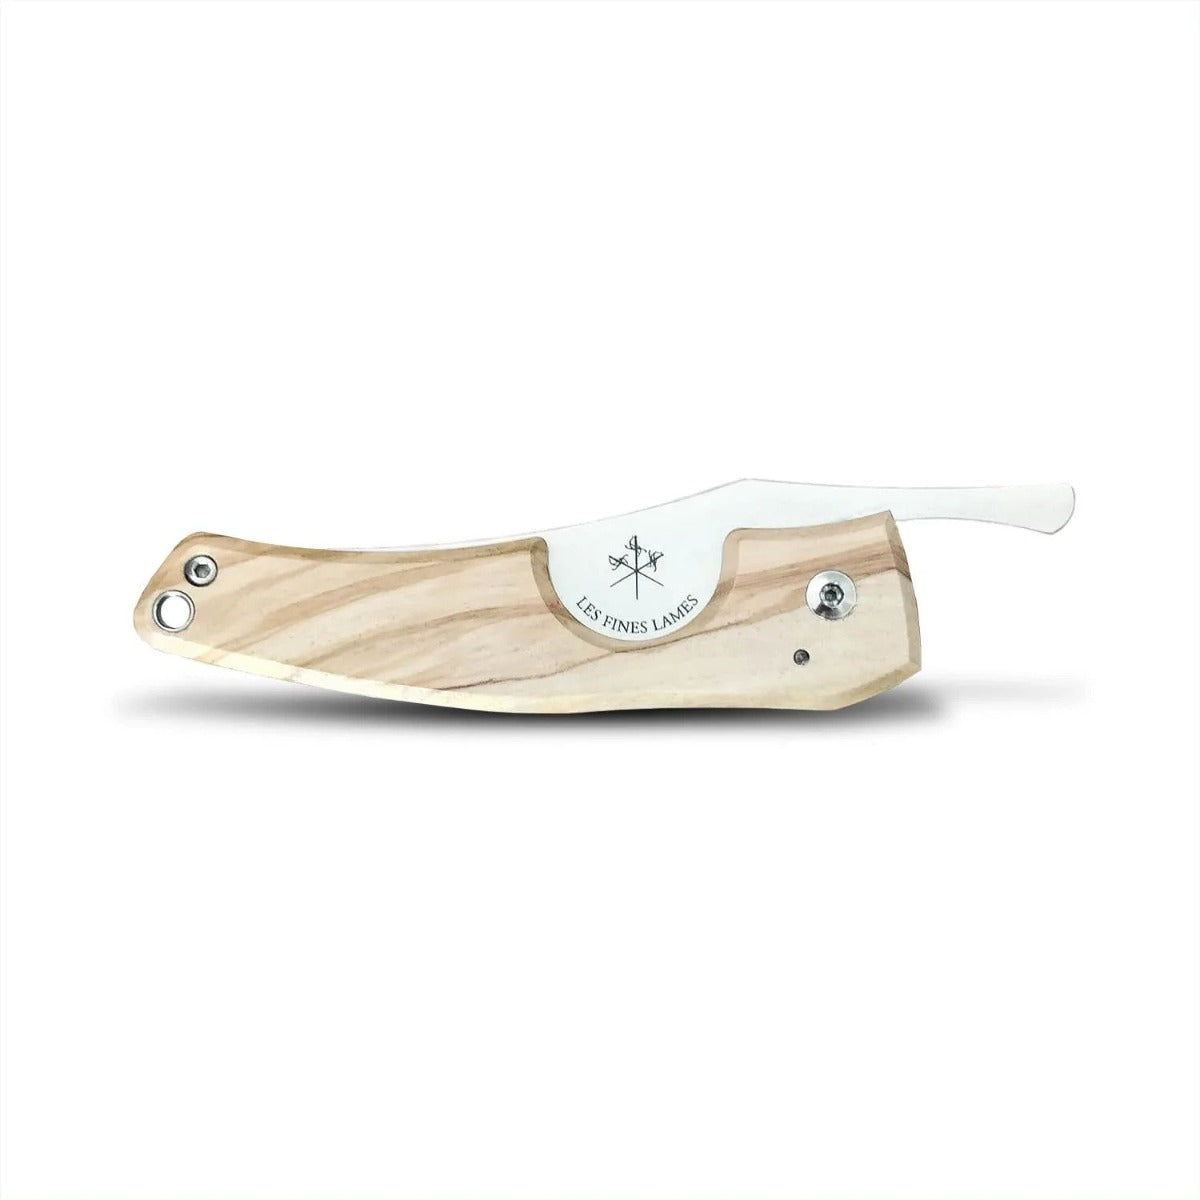 A Kirby Allison Olive Wood Cigar Knife from KirbyAllison.com featuring a durable Mediterranean wood handle on a white background.